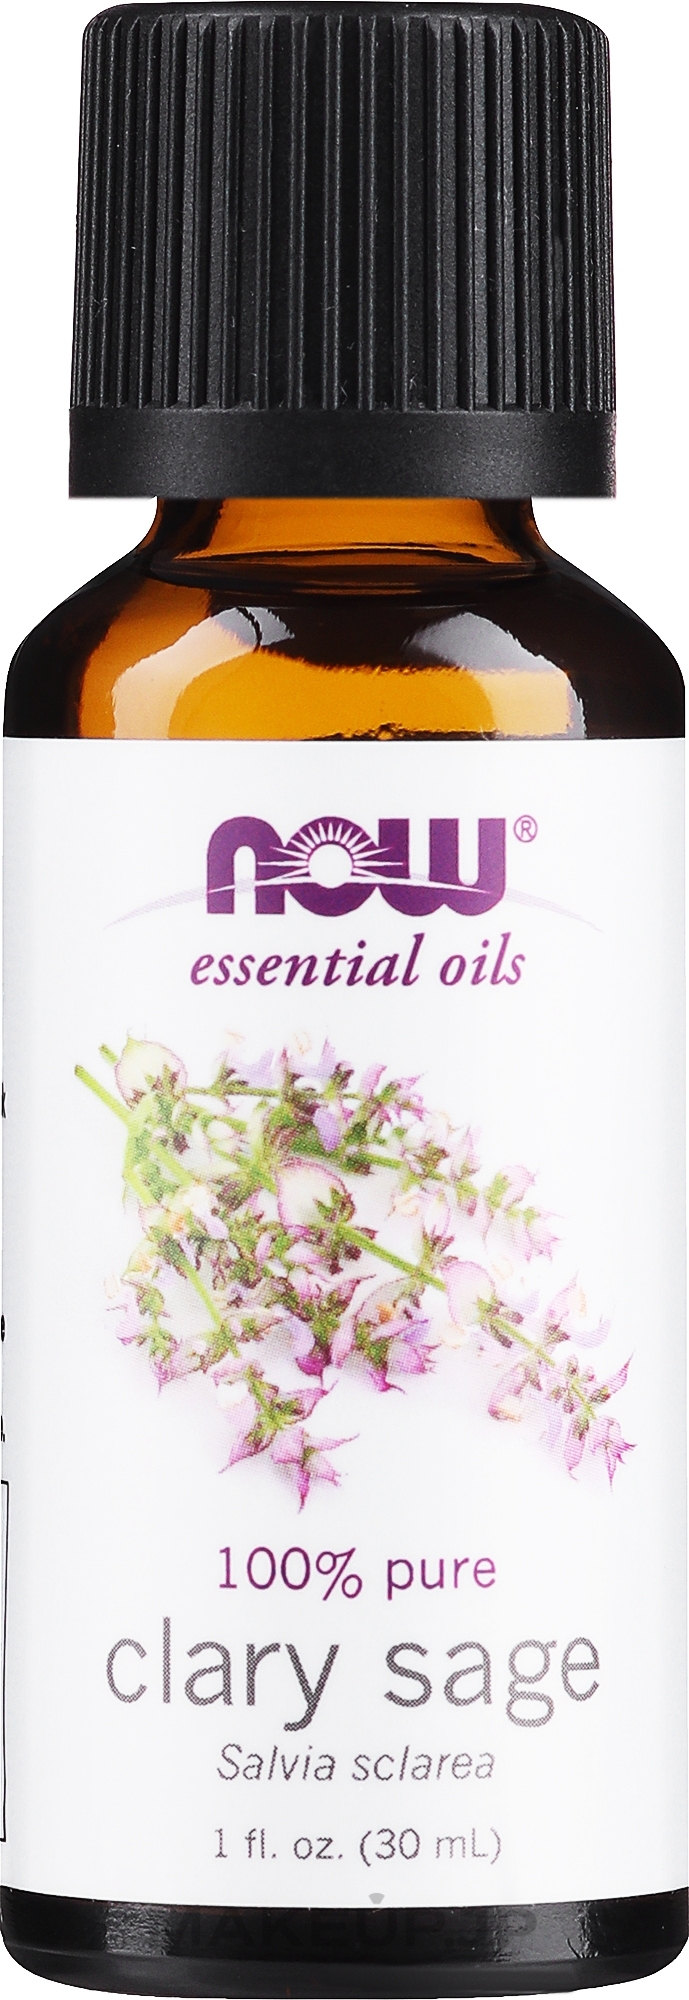 Clary Sage Essential Oil - Now Foods Essential Oils 100% Pure Clary Sage — photo 30 ml